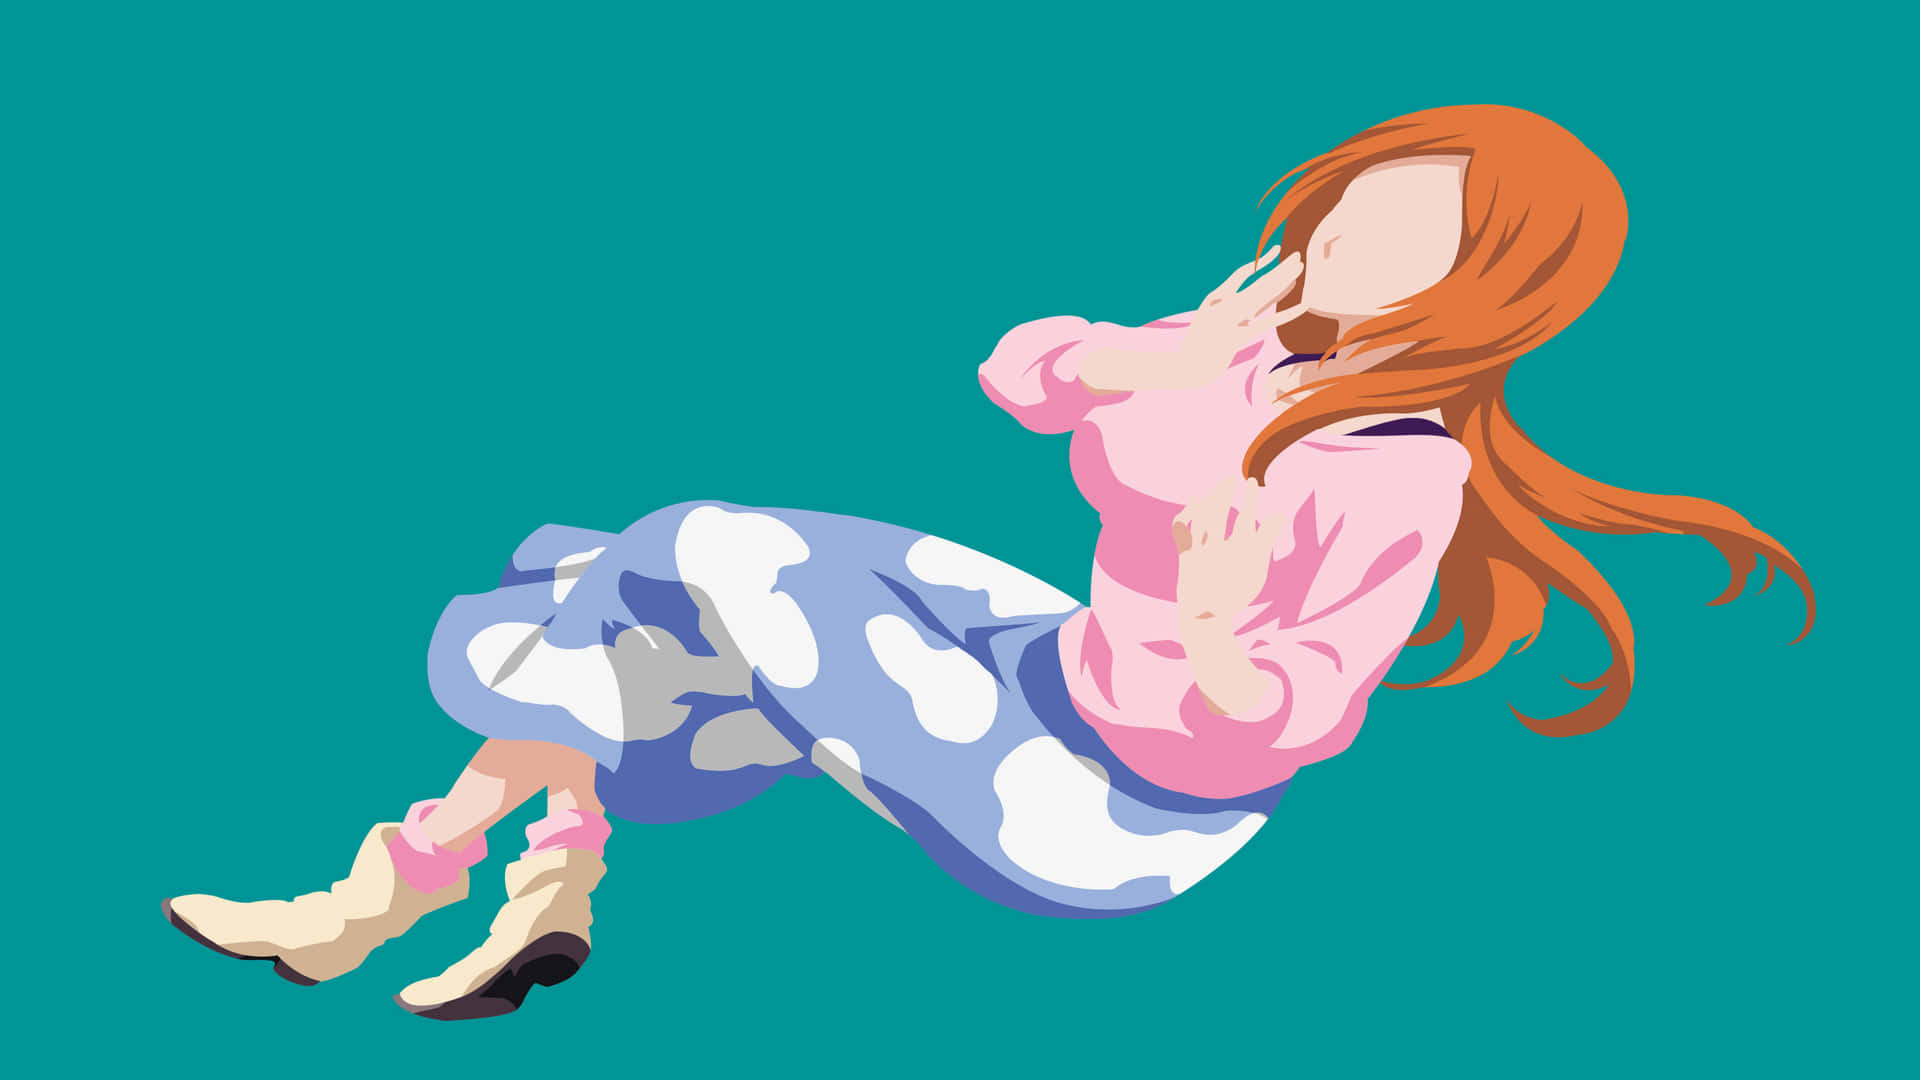 Orihime Inoue Shines in Her Signature Outfit Wallpaper